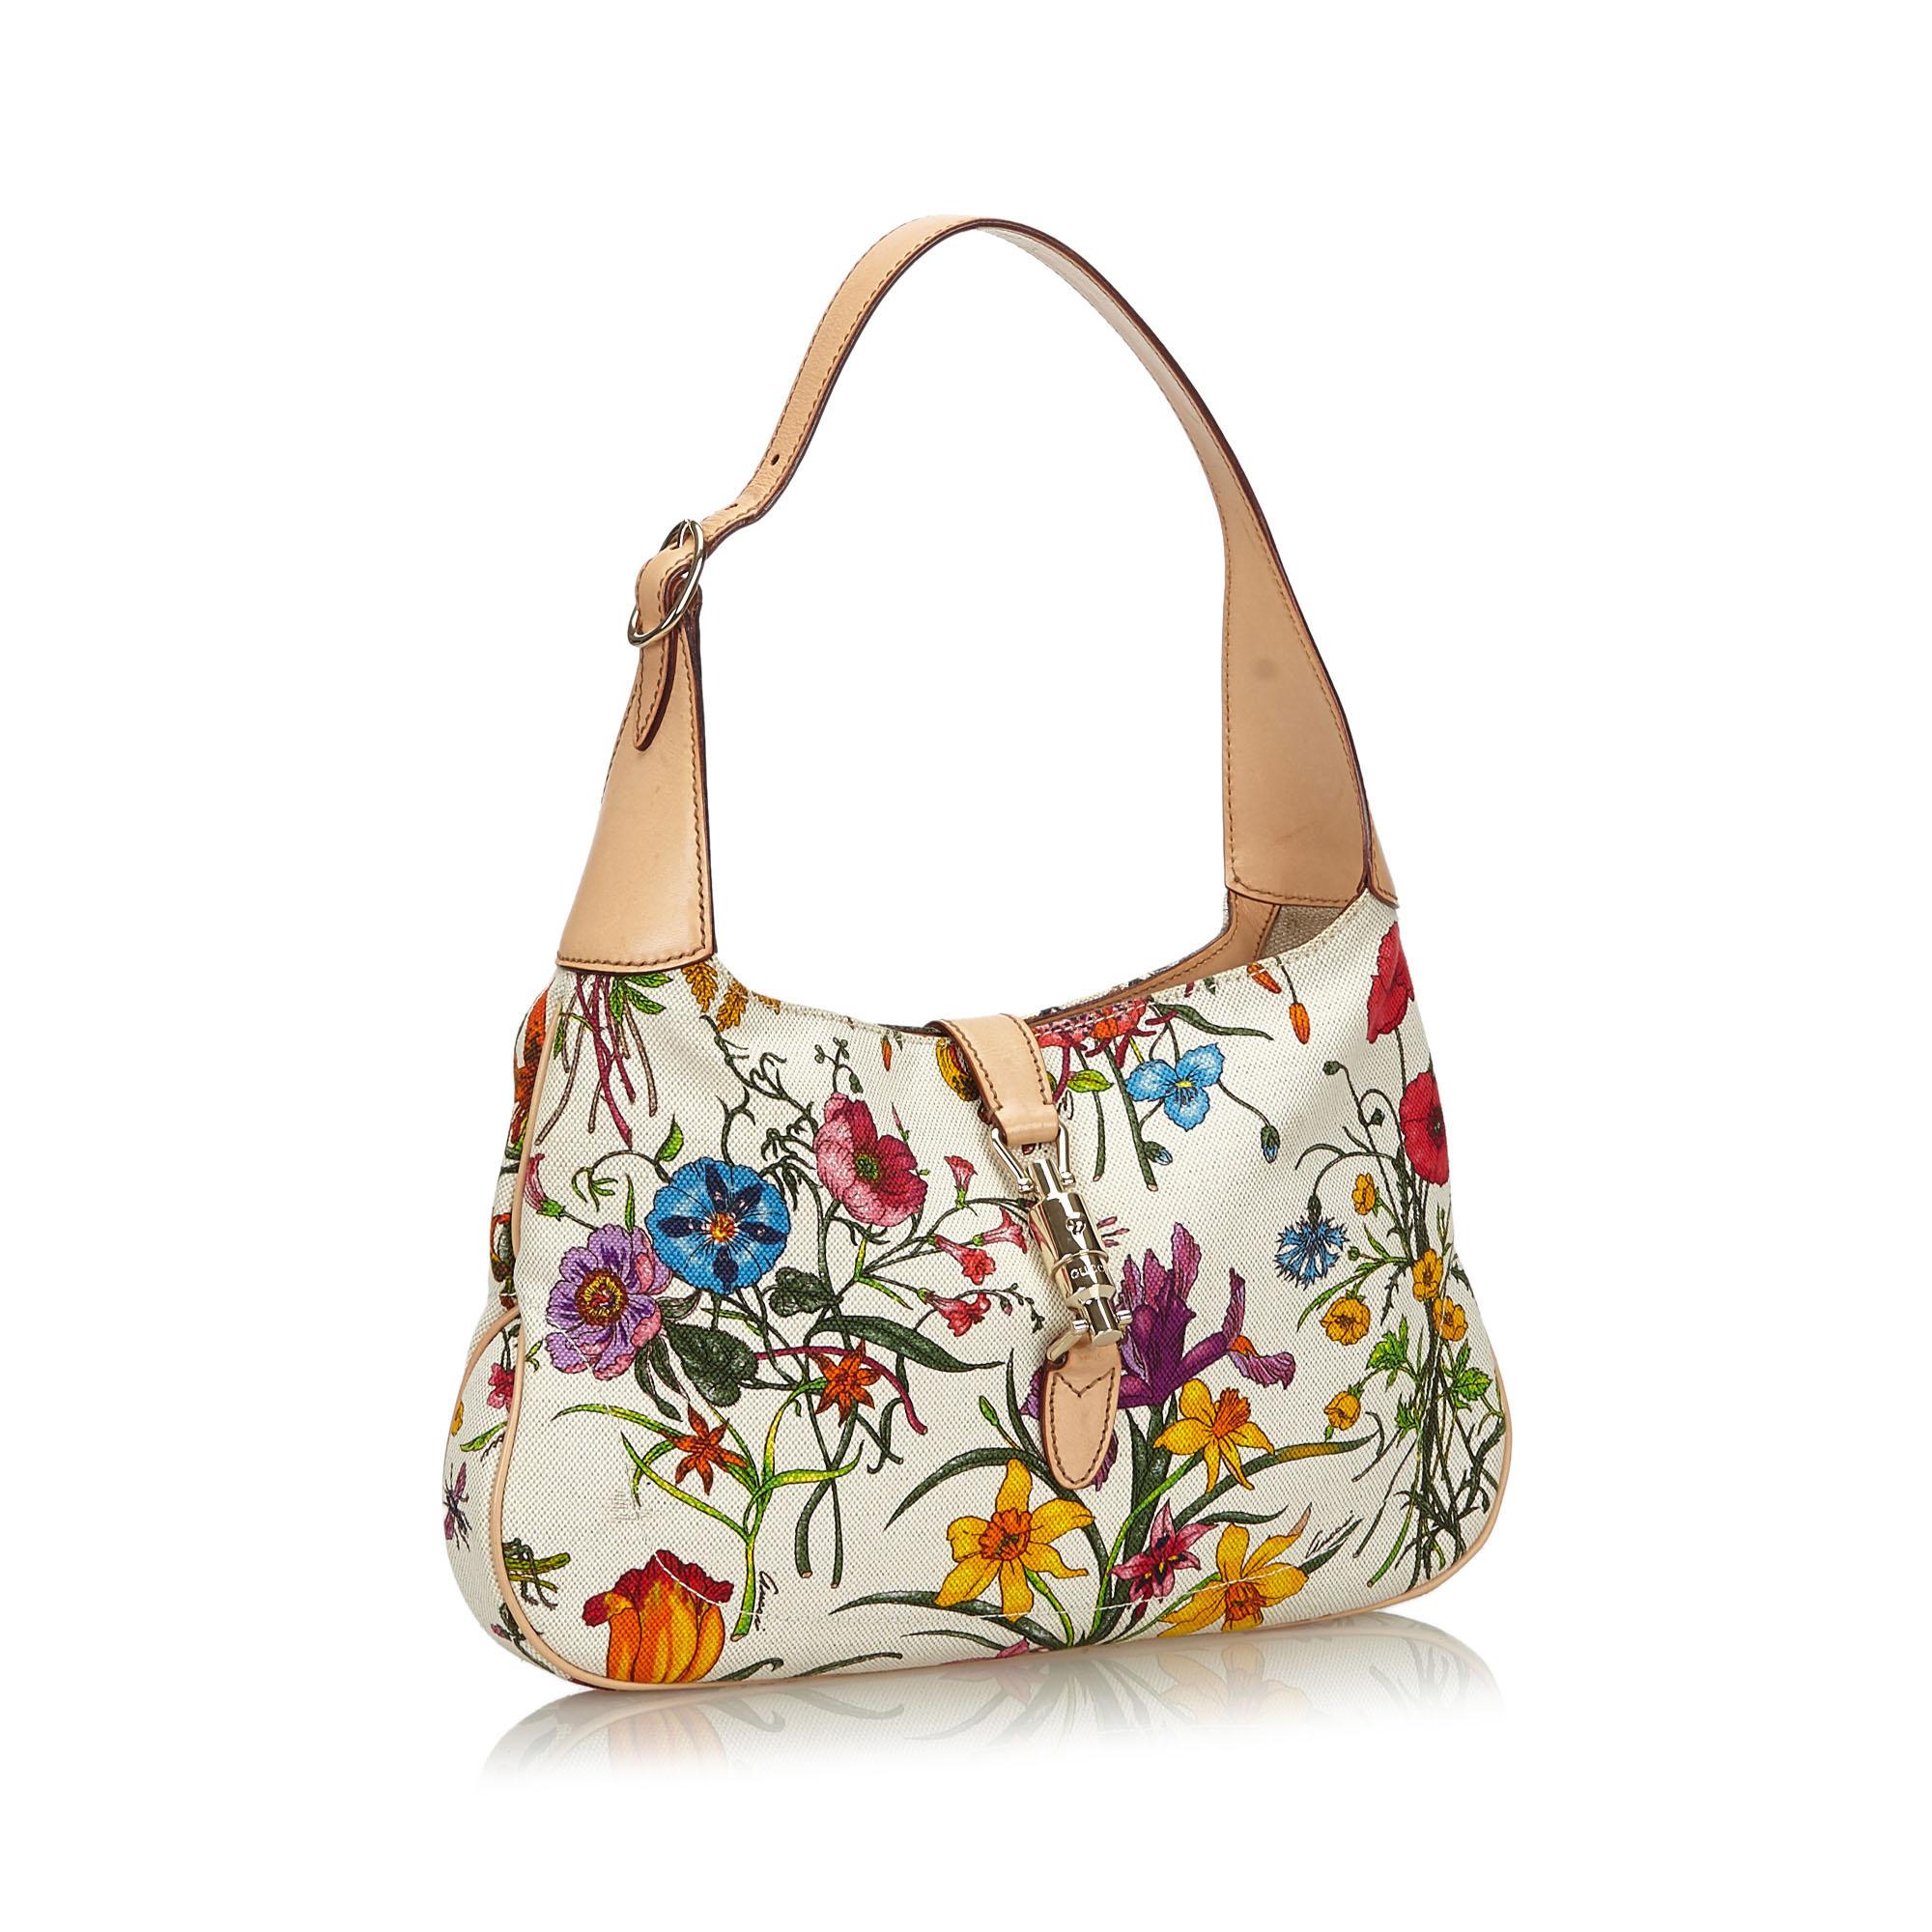 The Jackie shoulder bag features a floral canvas body, a flat shoulder strap, a front strap with a push lock closure, and an interior zip pocket. It carries as B+ condition rating.

Inclusions: 
This item does not come with